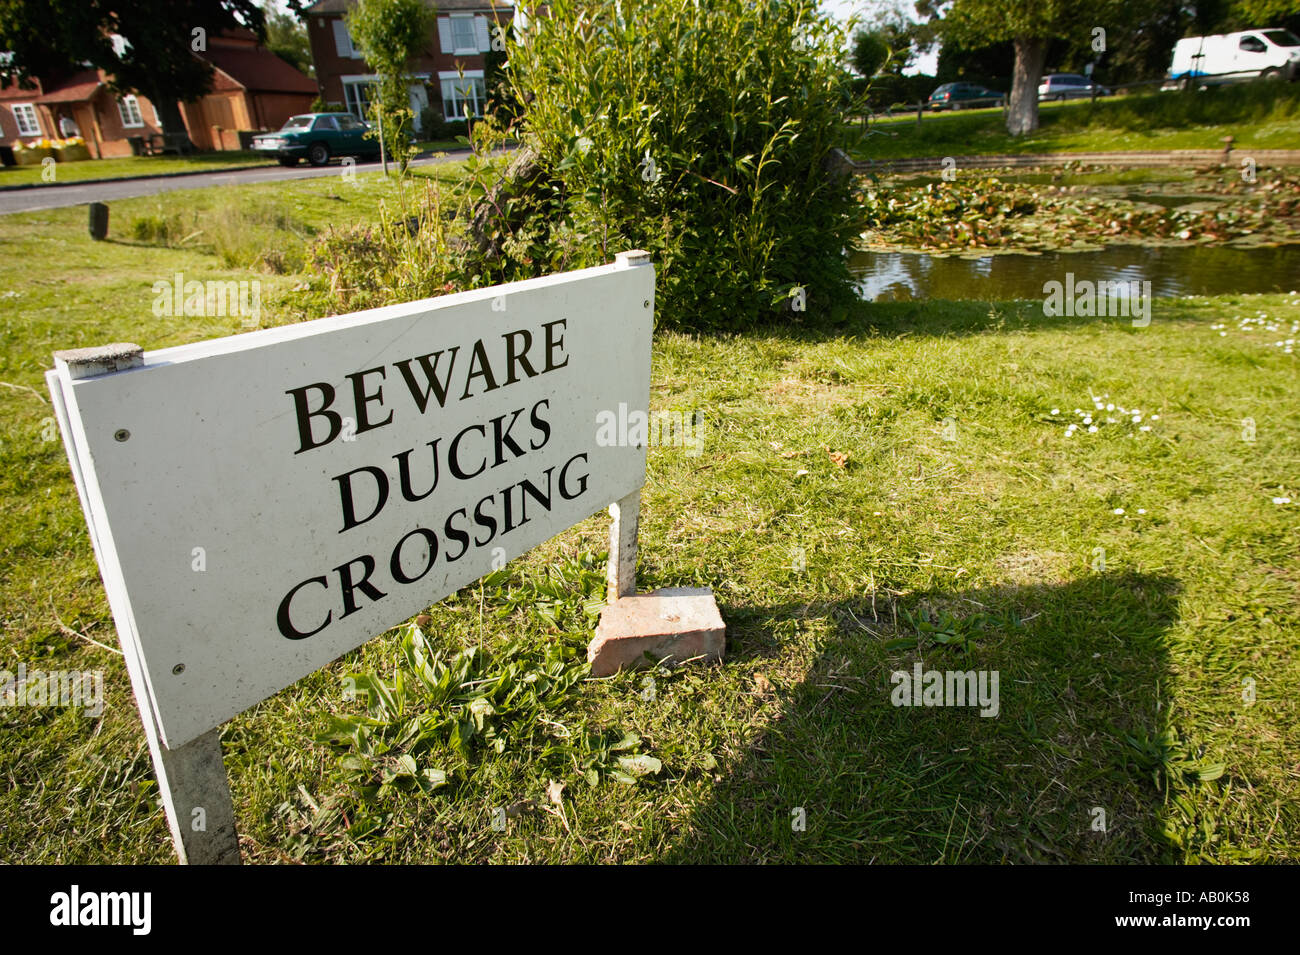 Ducks Crossing sign at Wisborough Green, West Sussex, England, UK Stock Photo